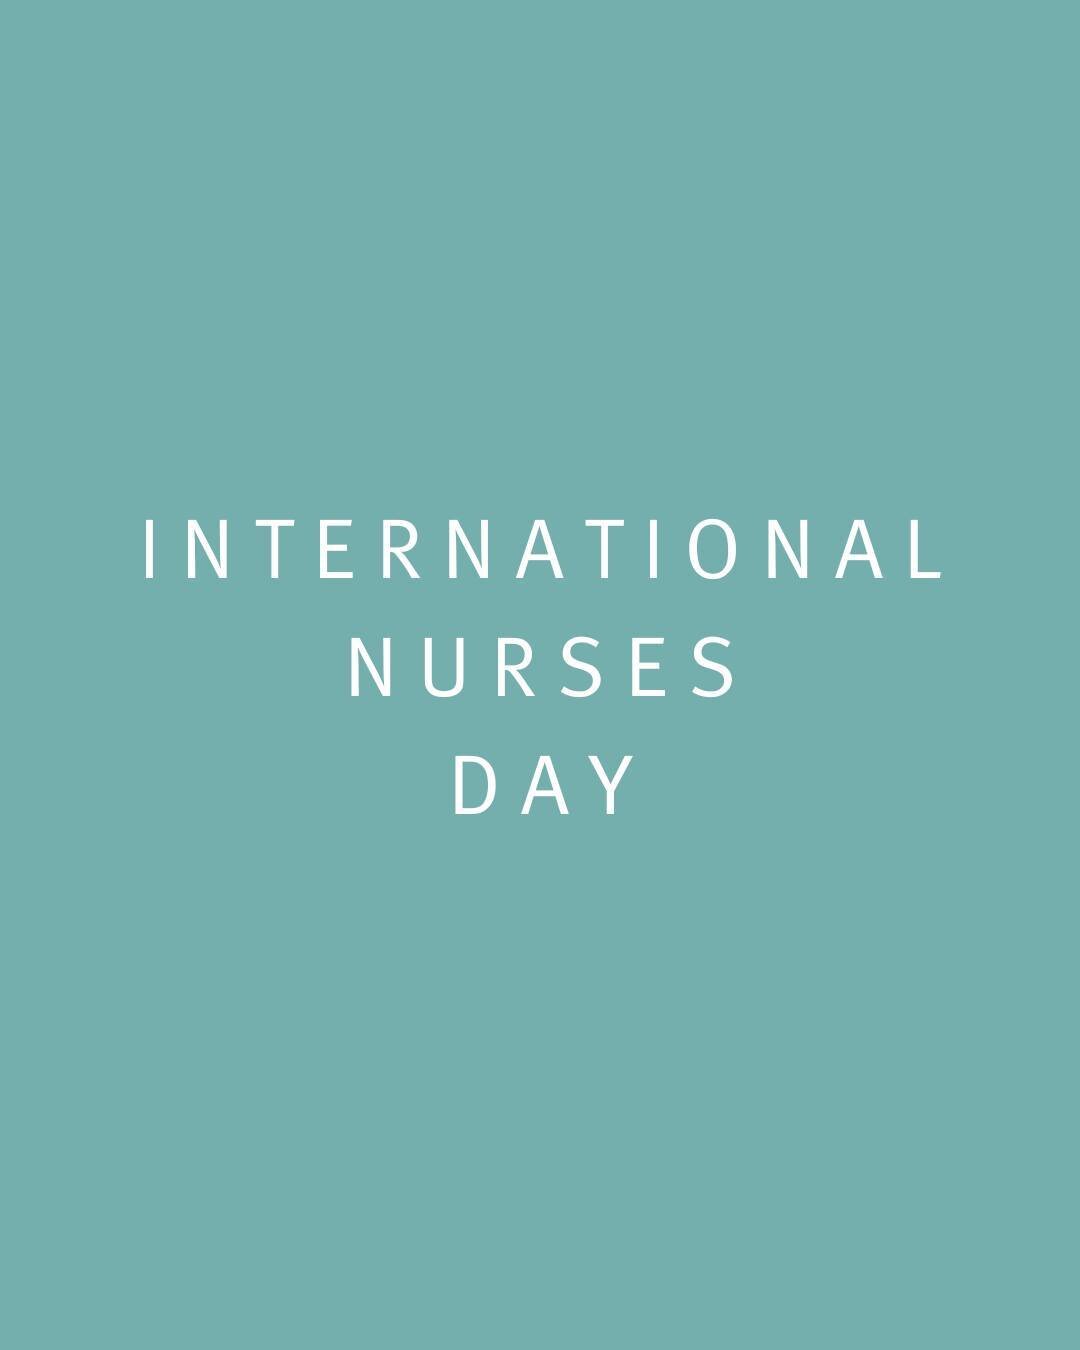 A special shoutout to nurses everywhere on International Nurses Day. Your courage, resilience, and strength are inspiring! 

We'd also like to mention one of our own healthcare heroes: Grant's amazing wife Victoria. Sending love and gratitude for all